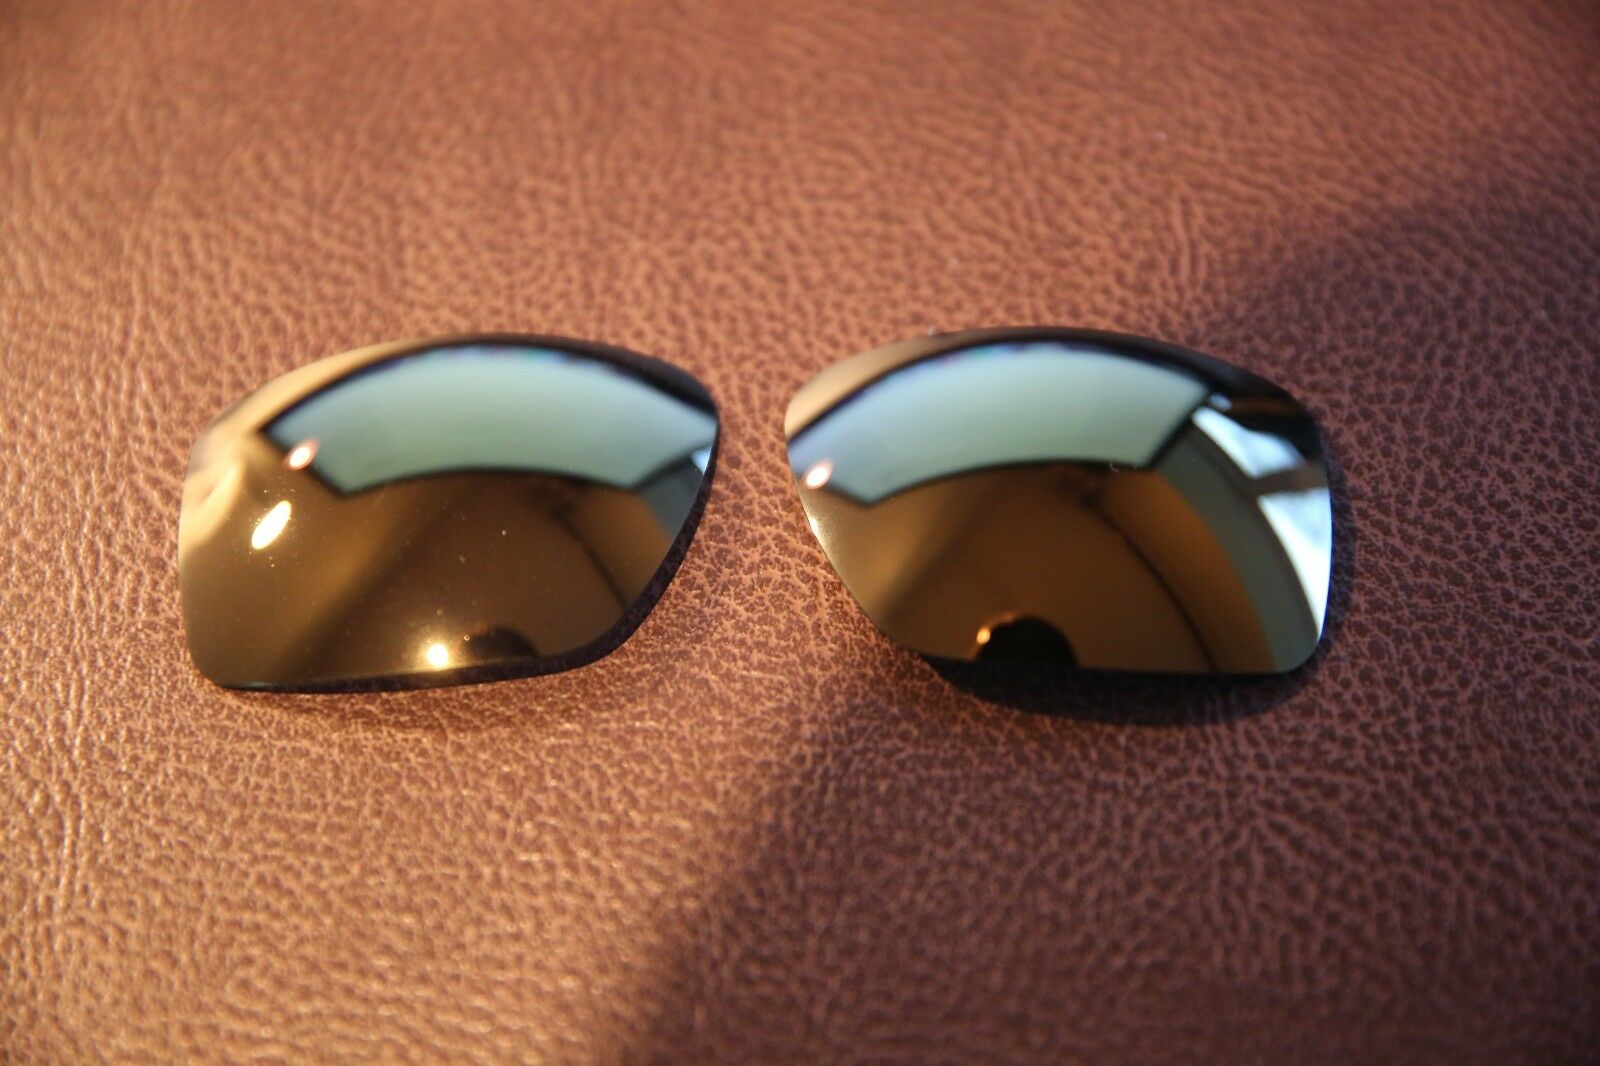 PolarLens POLARIZED 24k Gold Replacement Lens for-Oakley Big Taco Sunglasses